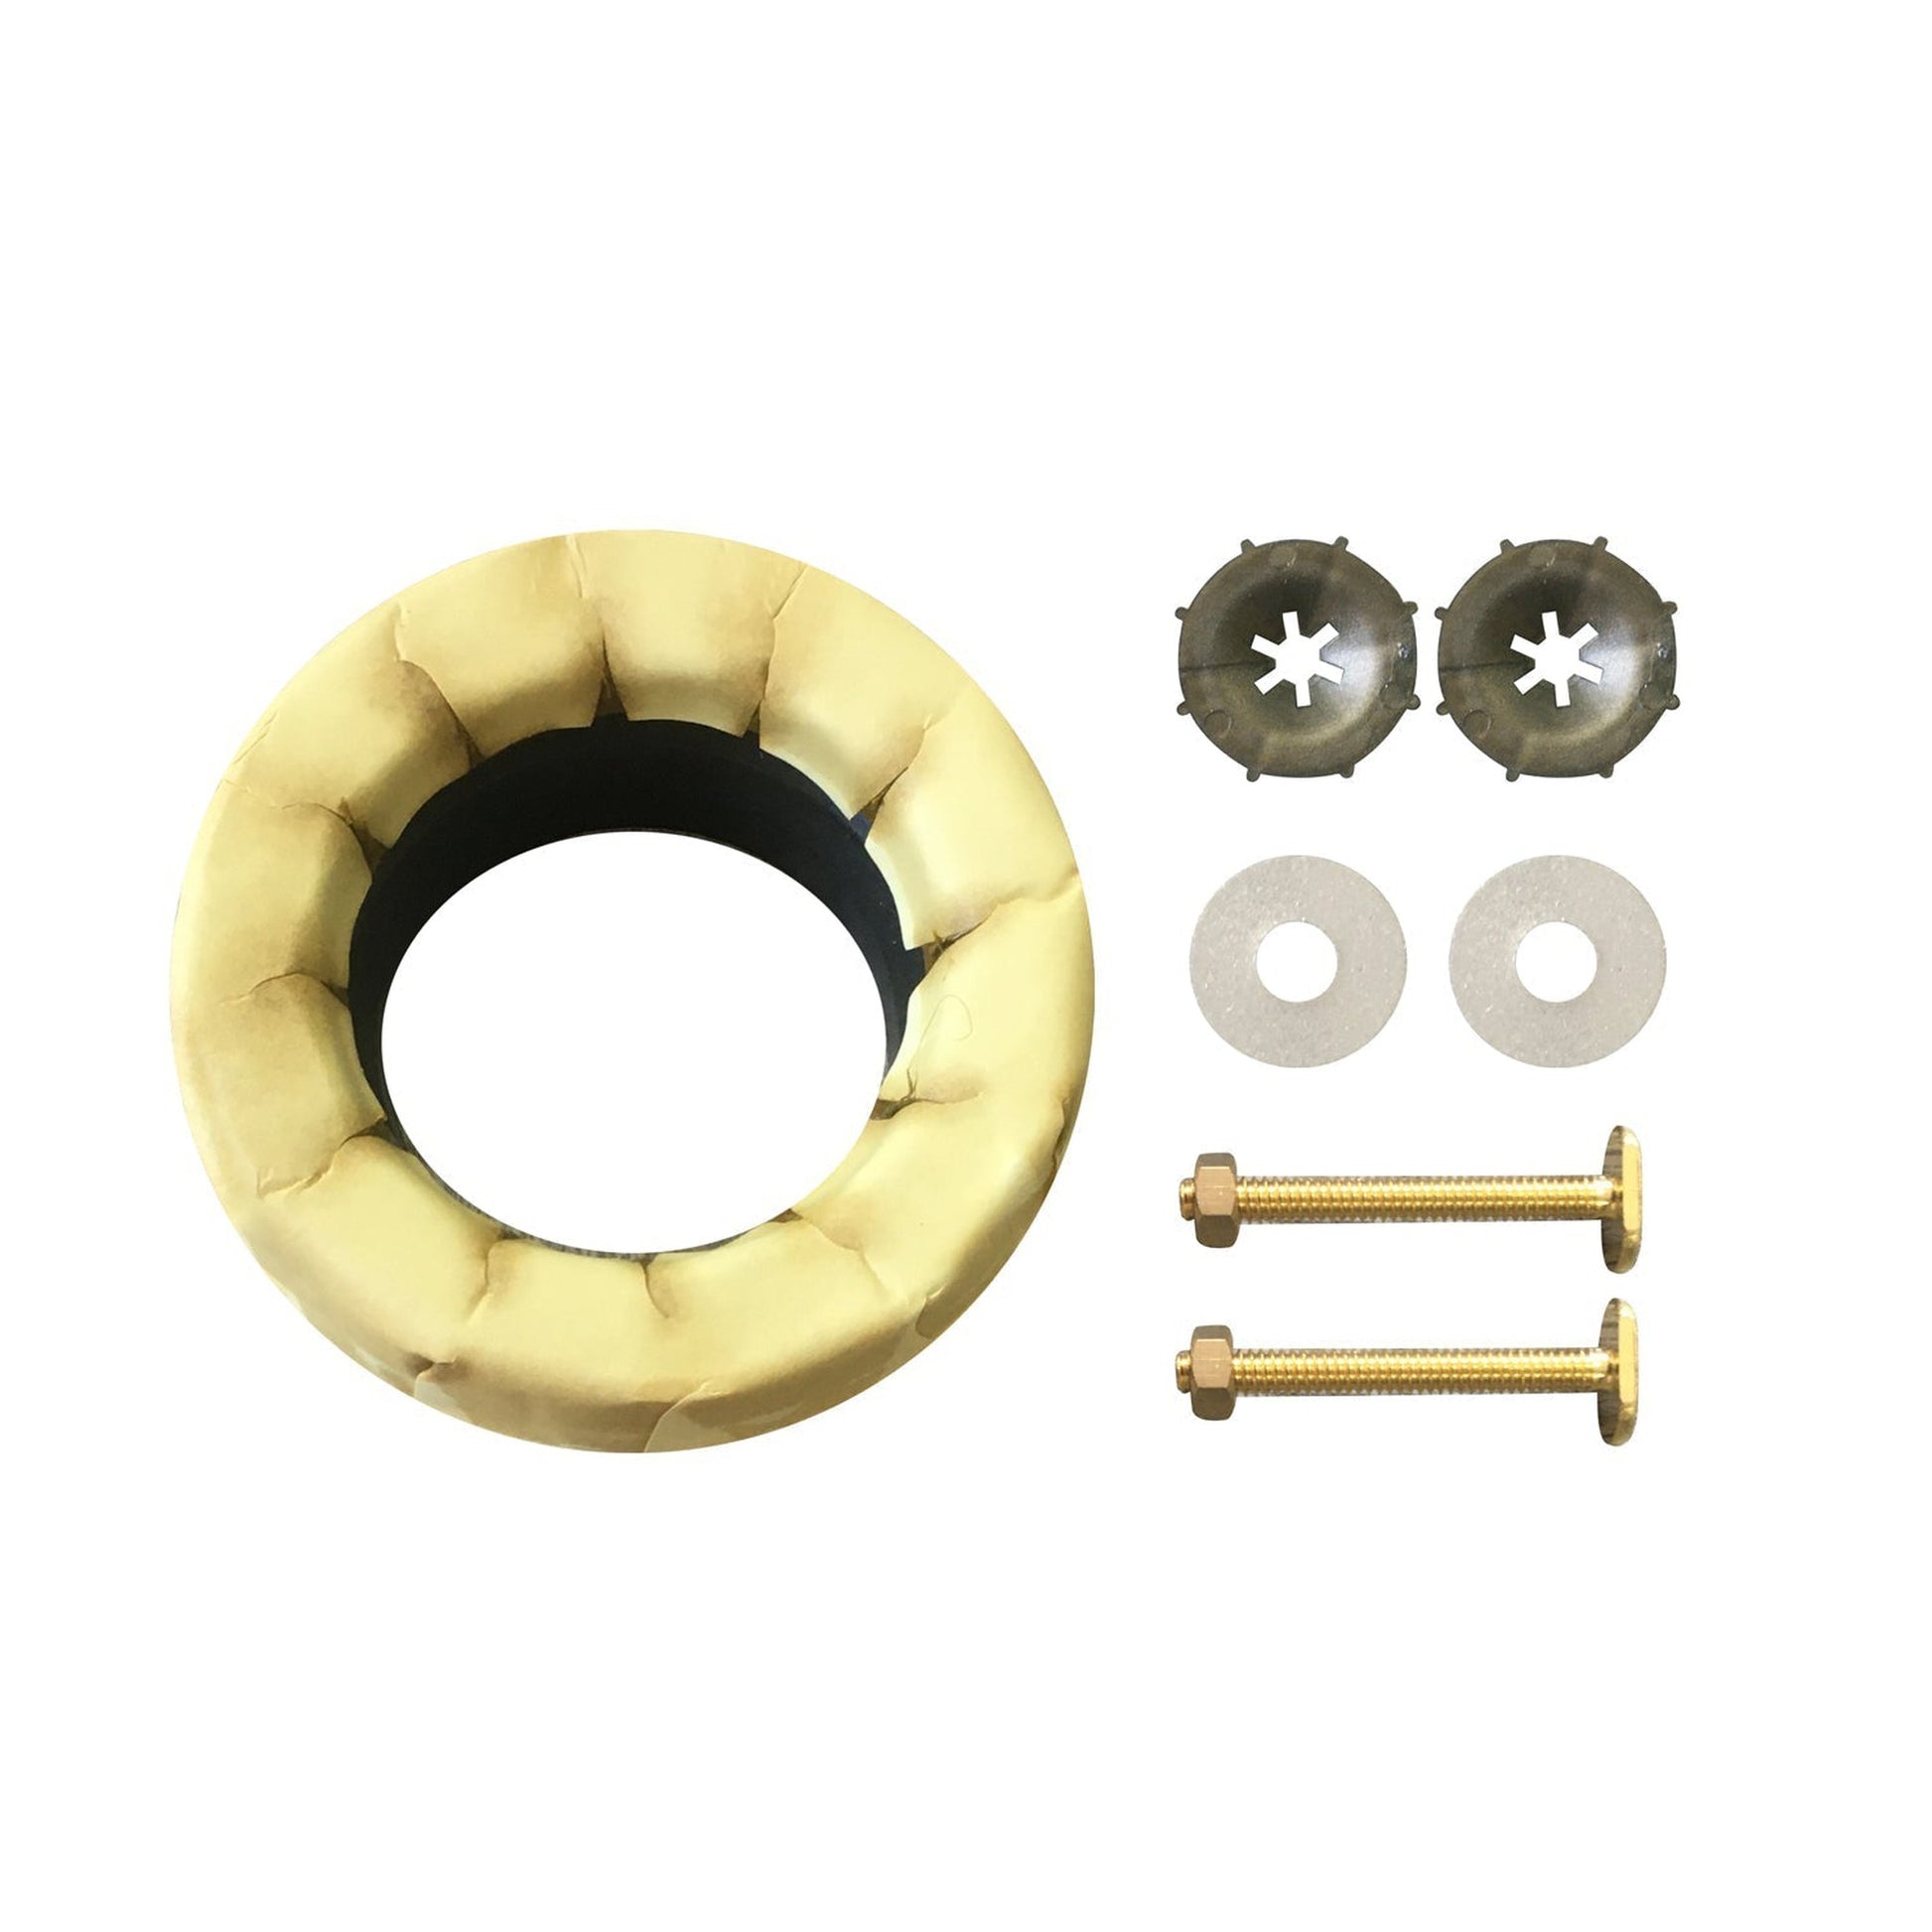 DeerValley DV-F026P41 Anchor Screw Installation Kit for Toilet Bowl (Fit with DV-1F52636)